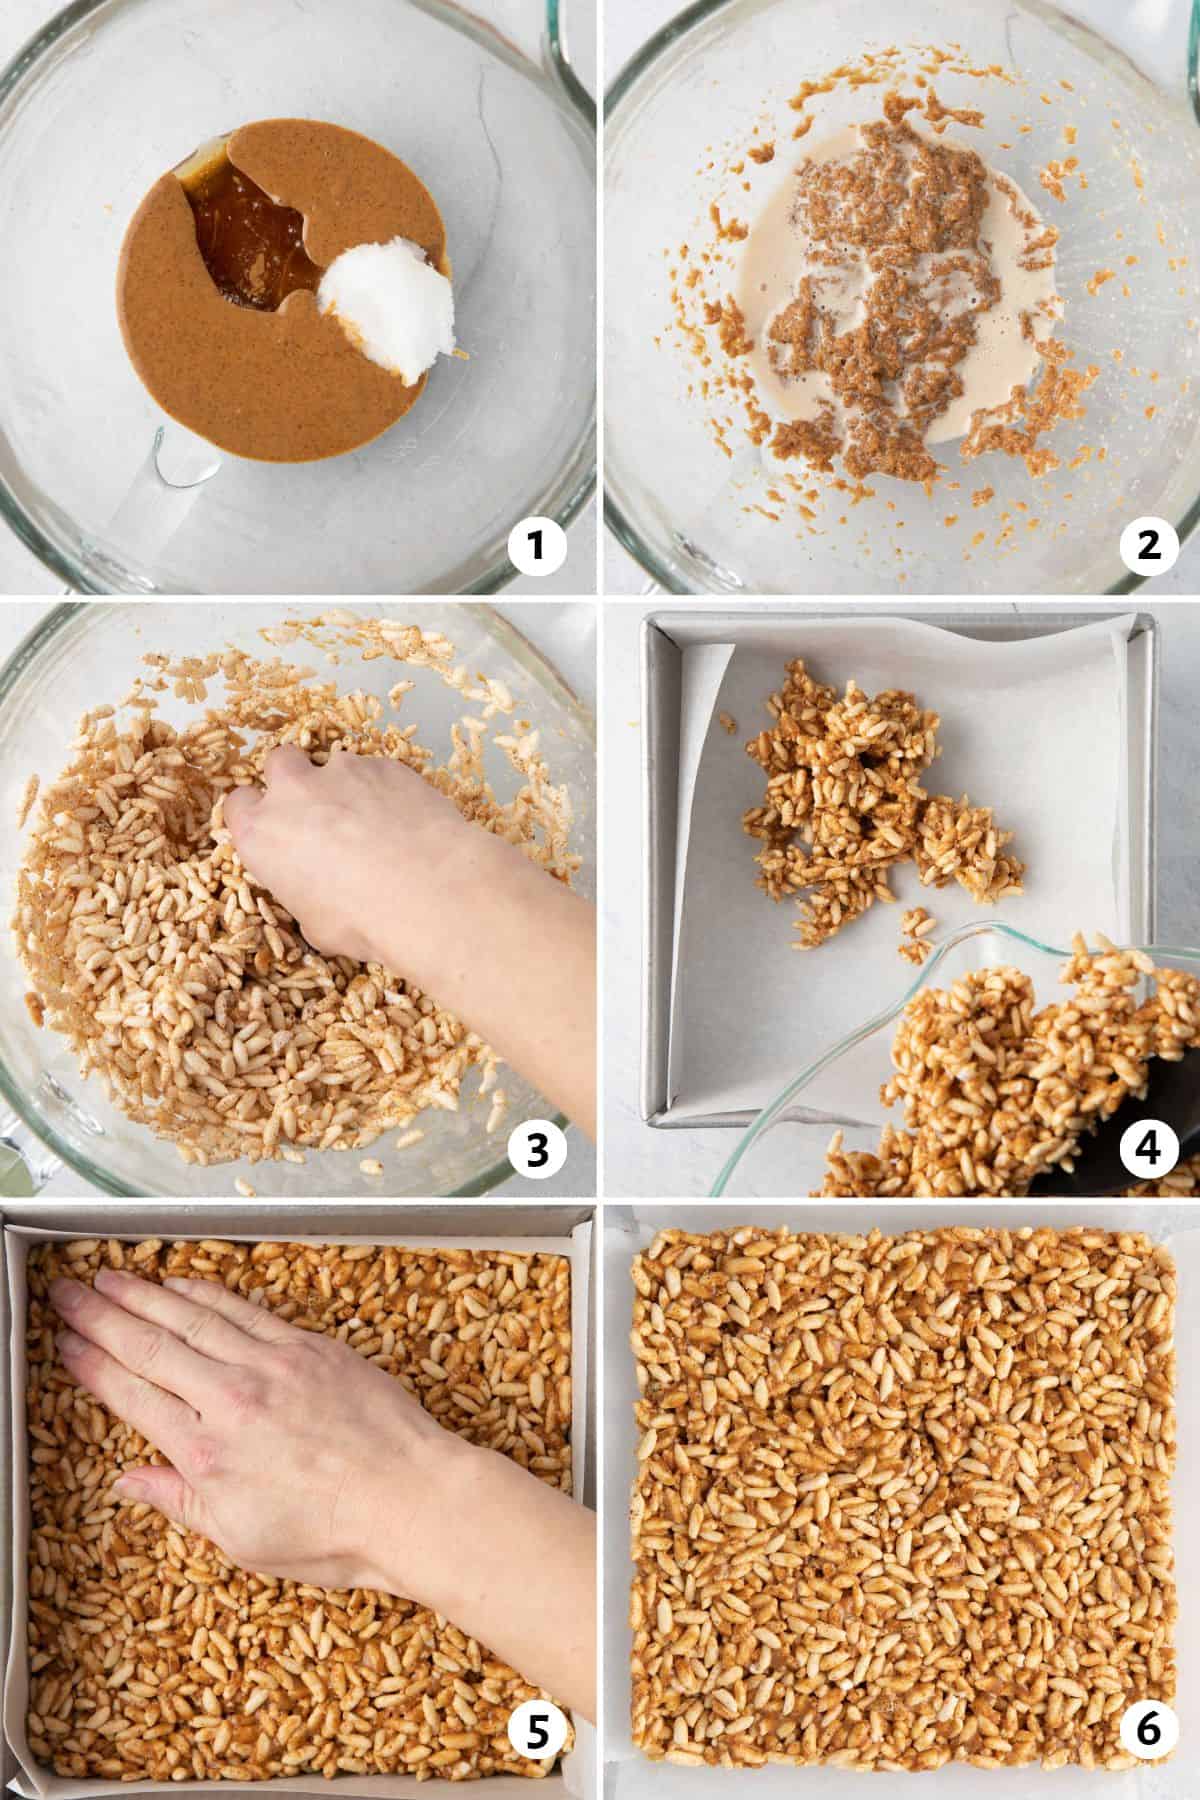 6 image collage making recipe: 1-Almond butter, honey and oil in a bowl of a stand mixer before combined, 2- after mixed showing slightly foamy mixture, 3- Hands gently folding the rice cereal into the almond mixture, 4- adding mixture to prepared pan, 5- Pressing mixture down into pan, 6- remove from pan and set.